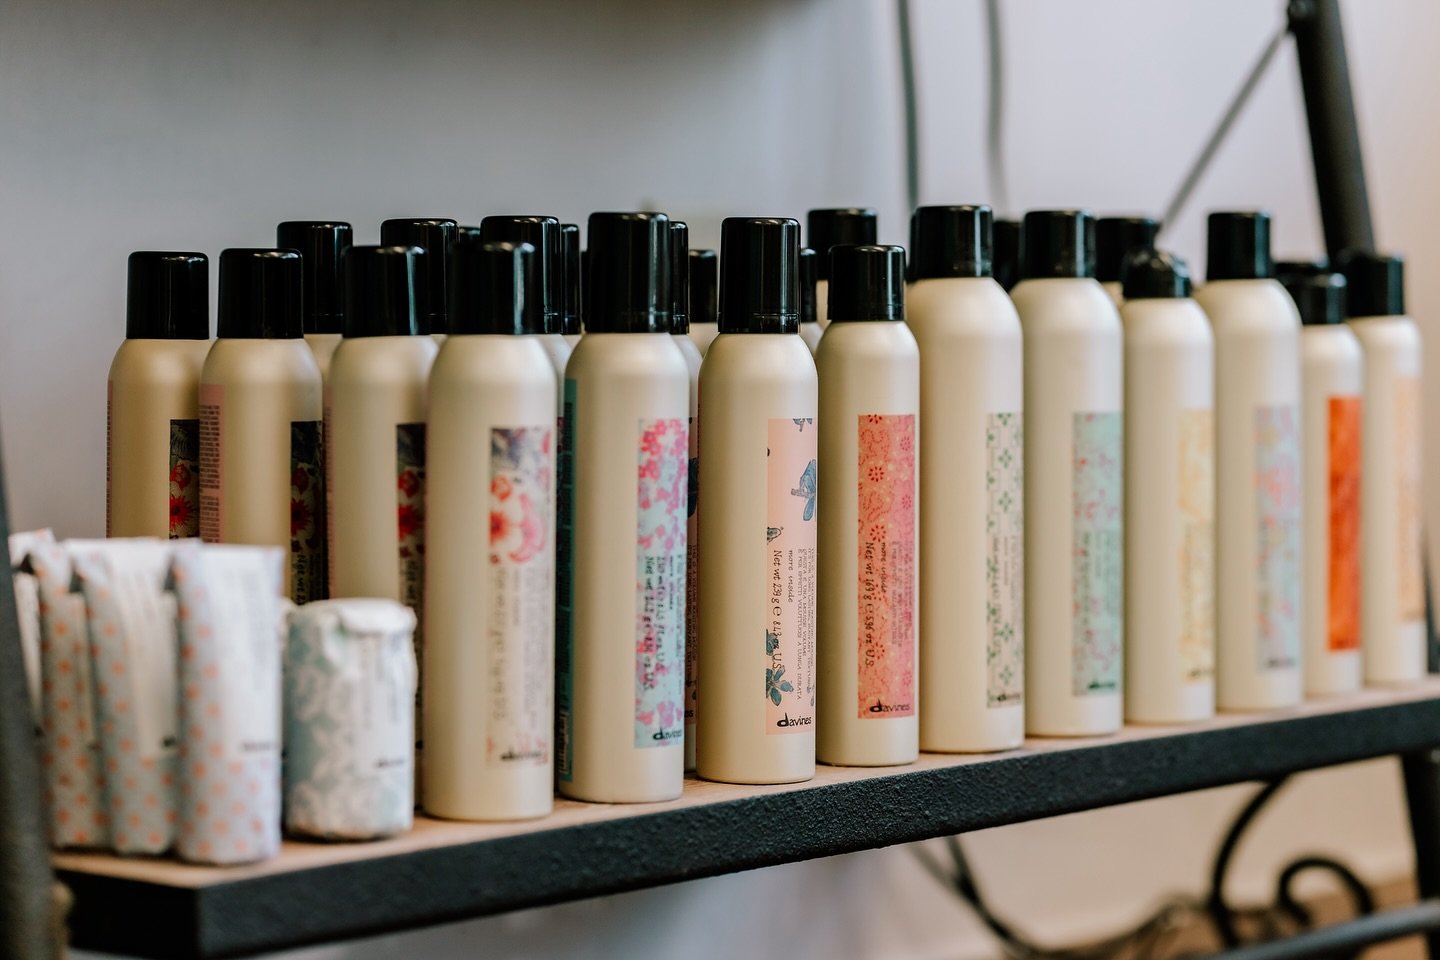 Davines offers a product for every occasion, book a blowout and a stylist and walk you through how to use each product. Call 8286971077 to book📲 #5thavenuesalonhvl #hendersonvillenc #hendersonvillestylist #smallbuisness #828isgreat #flatrocknc